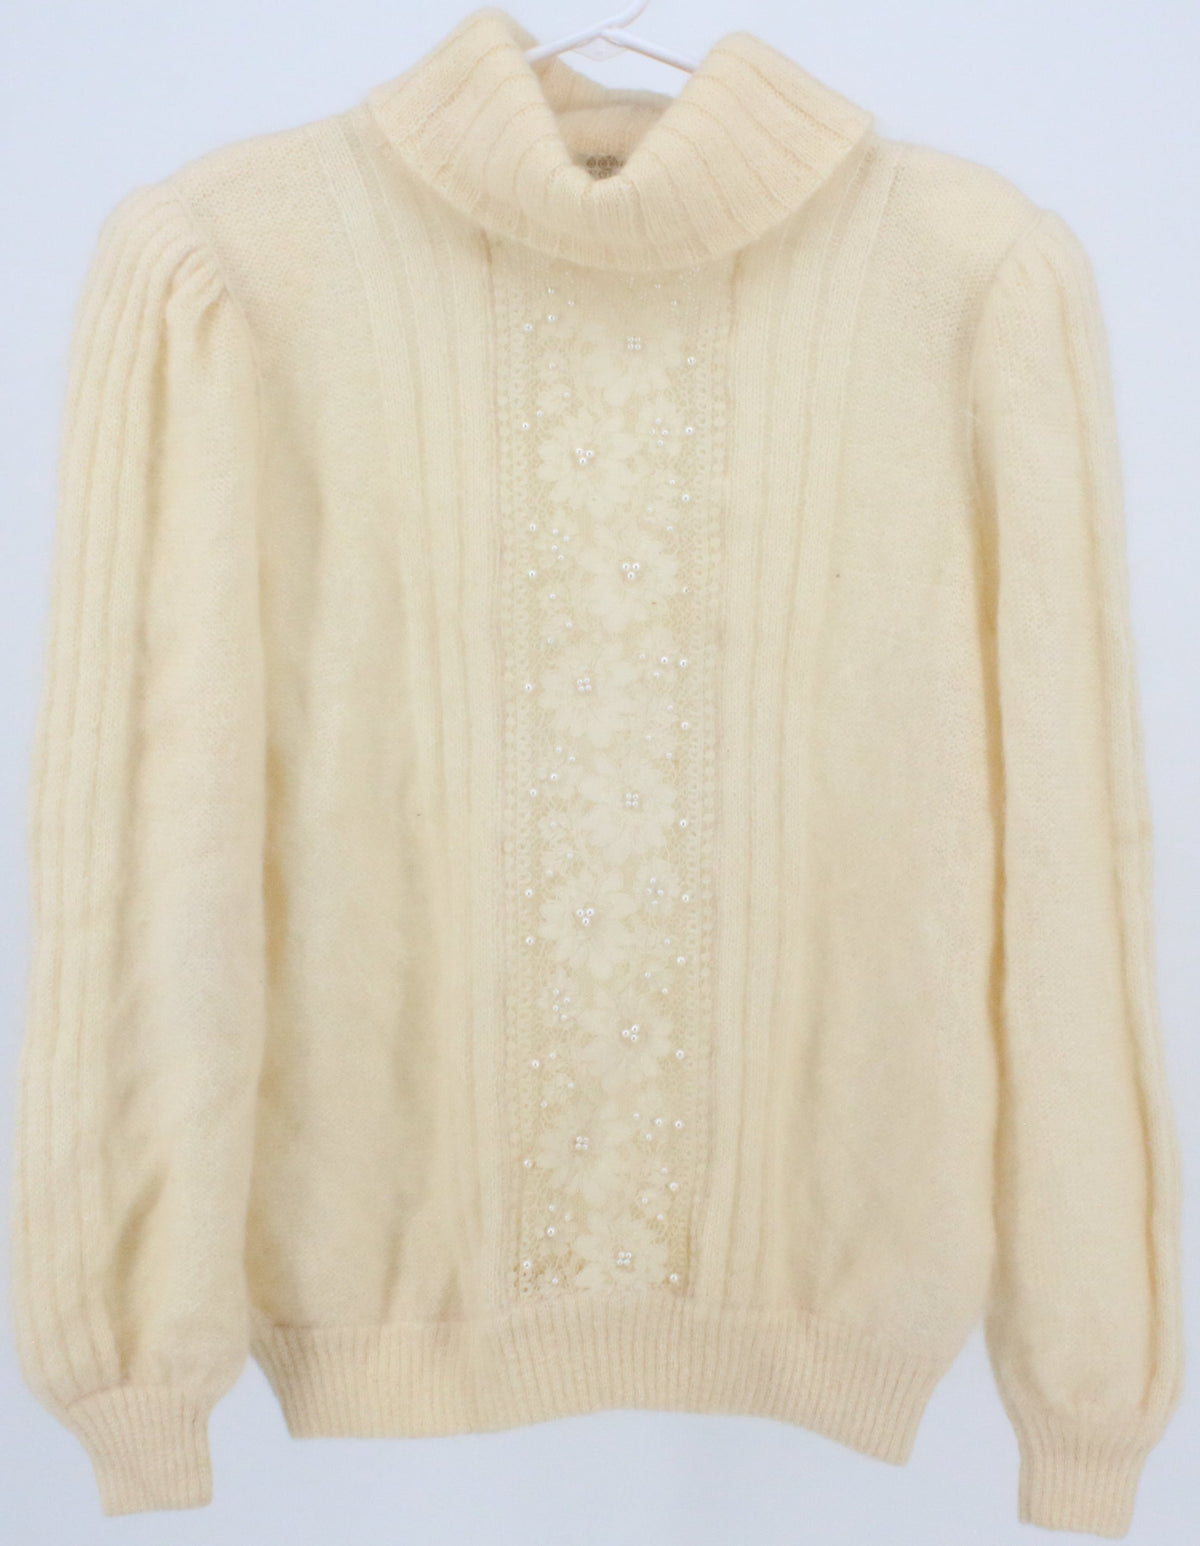 Giorgio Grati Beige Turtleneck Sweater With Front Lace and Pearls Detail